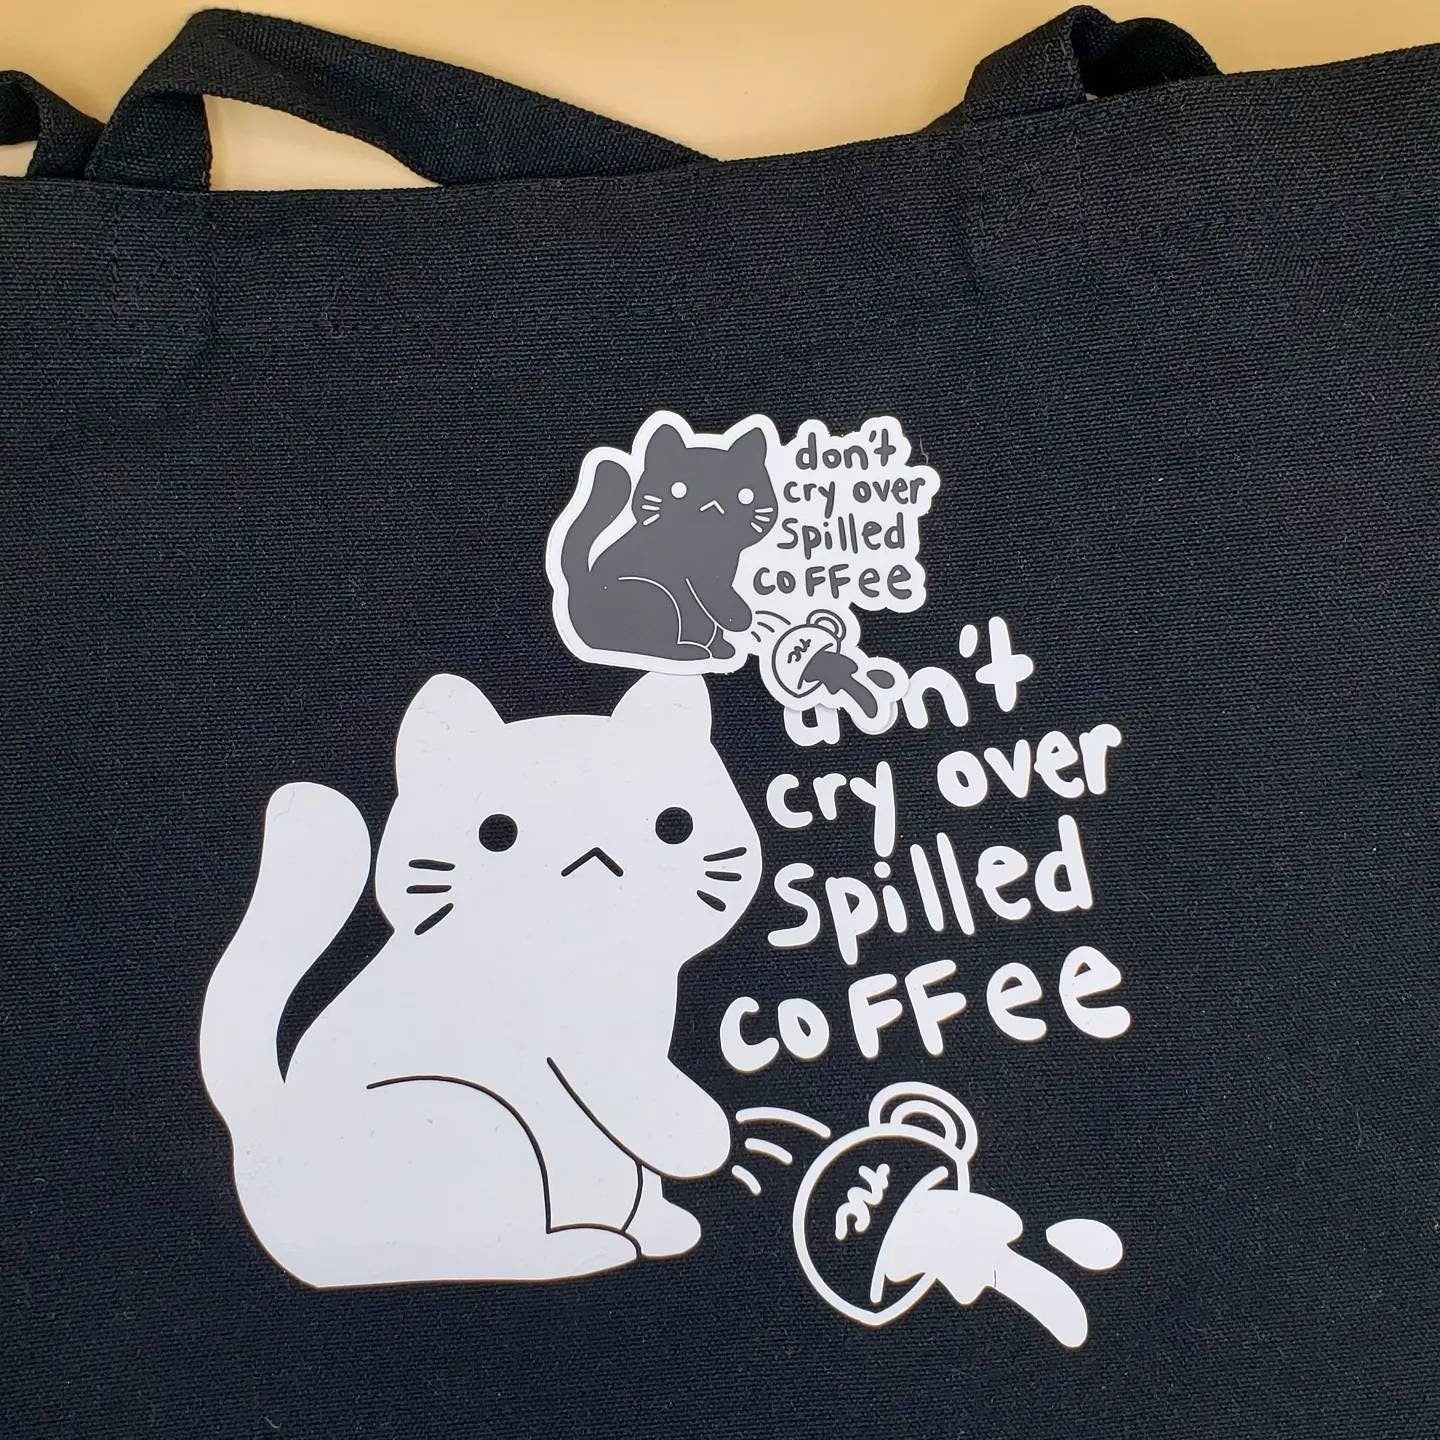 Black Cat Coffee Vinyl Stickers and Keychains | Don't Cry Over Spilled Coffee